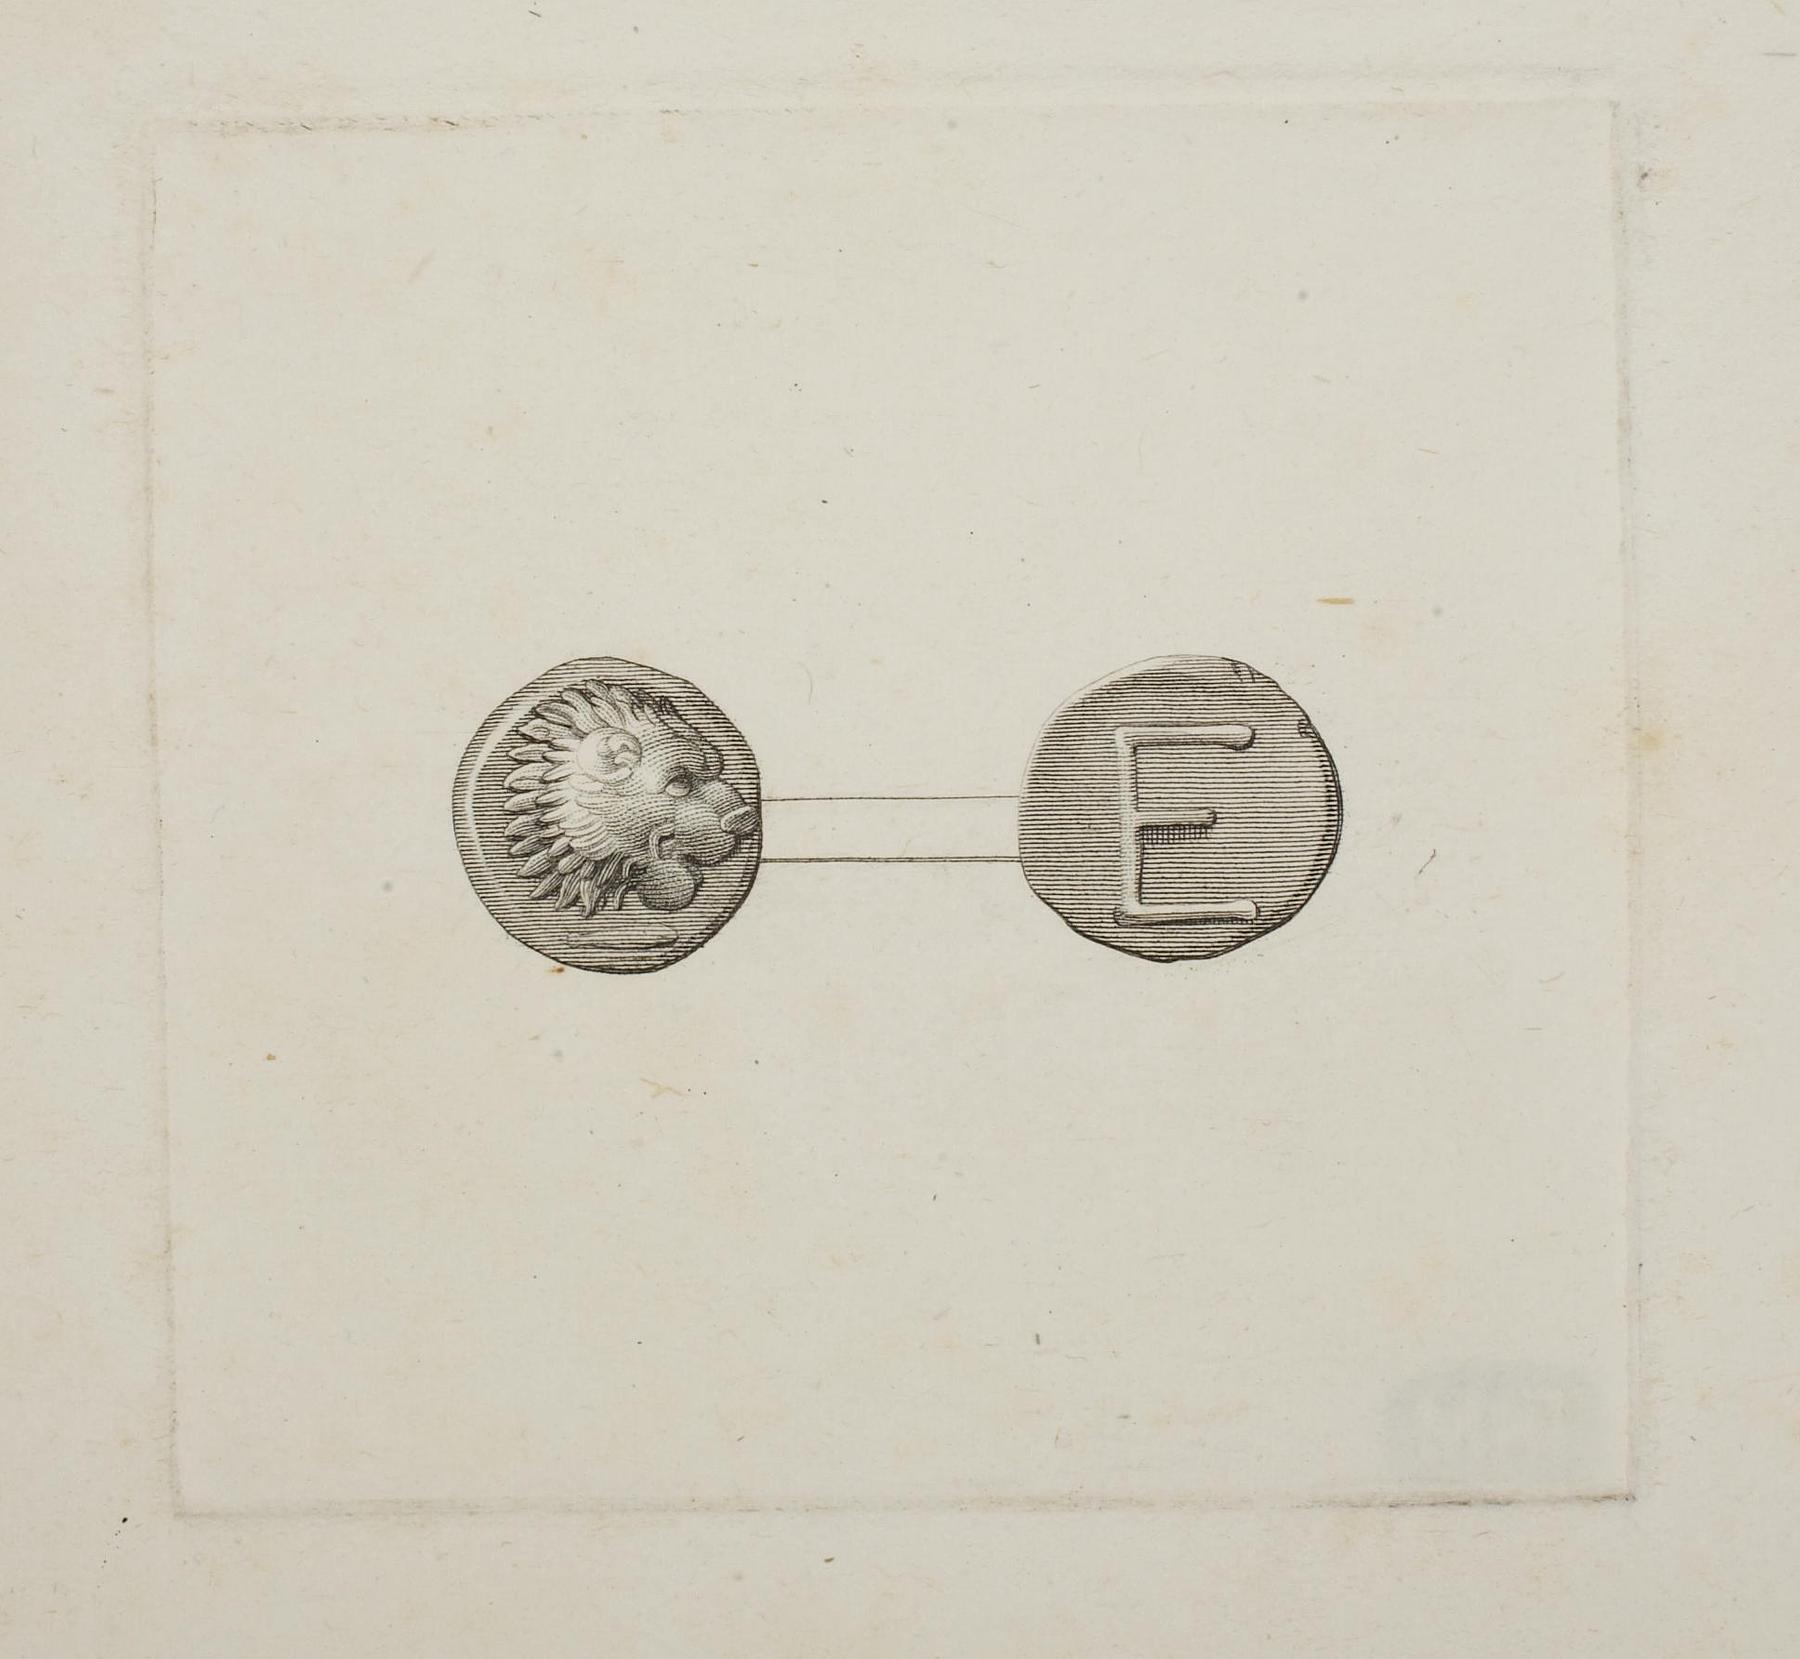 Greek coins obverse and reverse, E1557